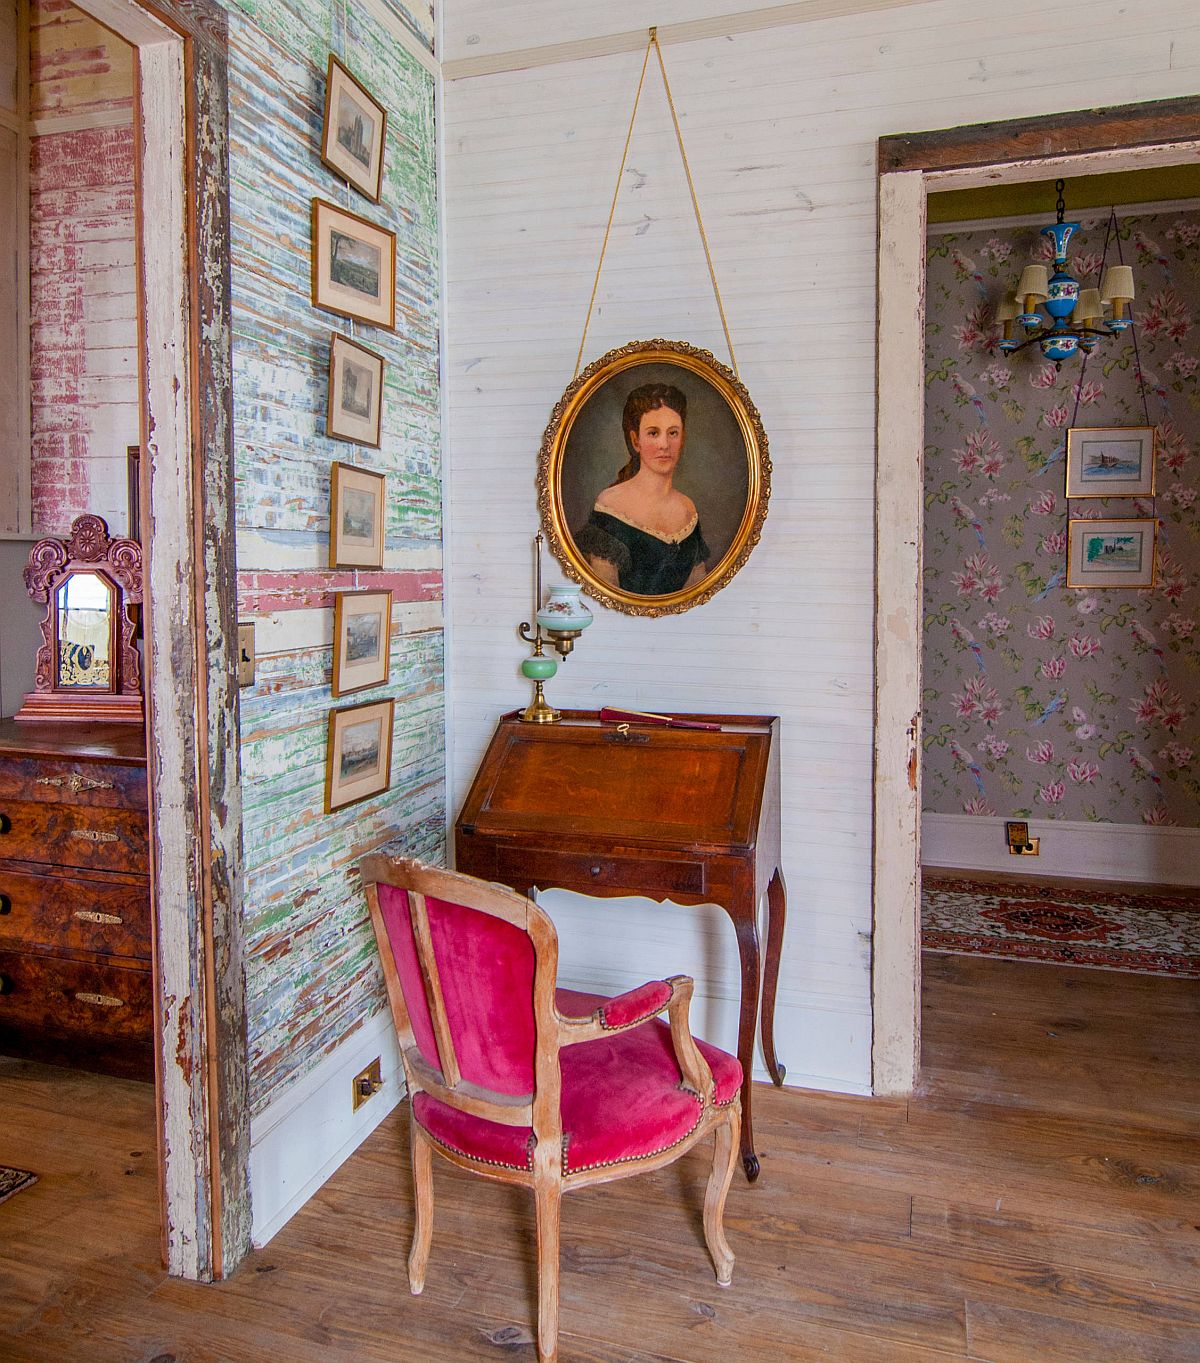 Bringing-classic-Victorian-and-farmhouse-touches-to-the-tiny-eclectic-home-workspace-with-a-dash-of-pink-17944